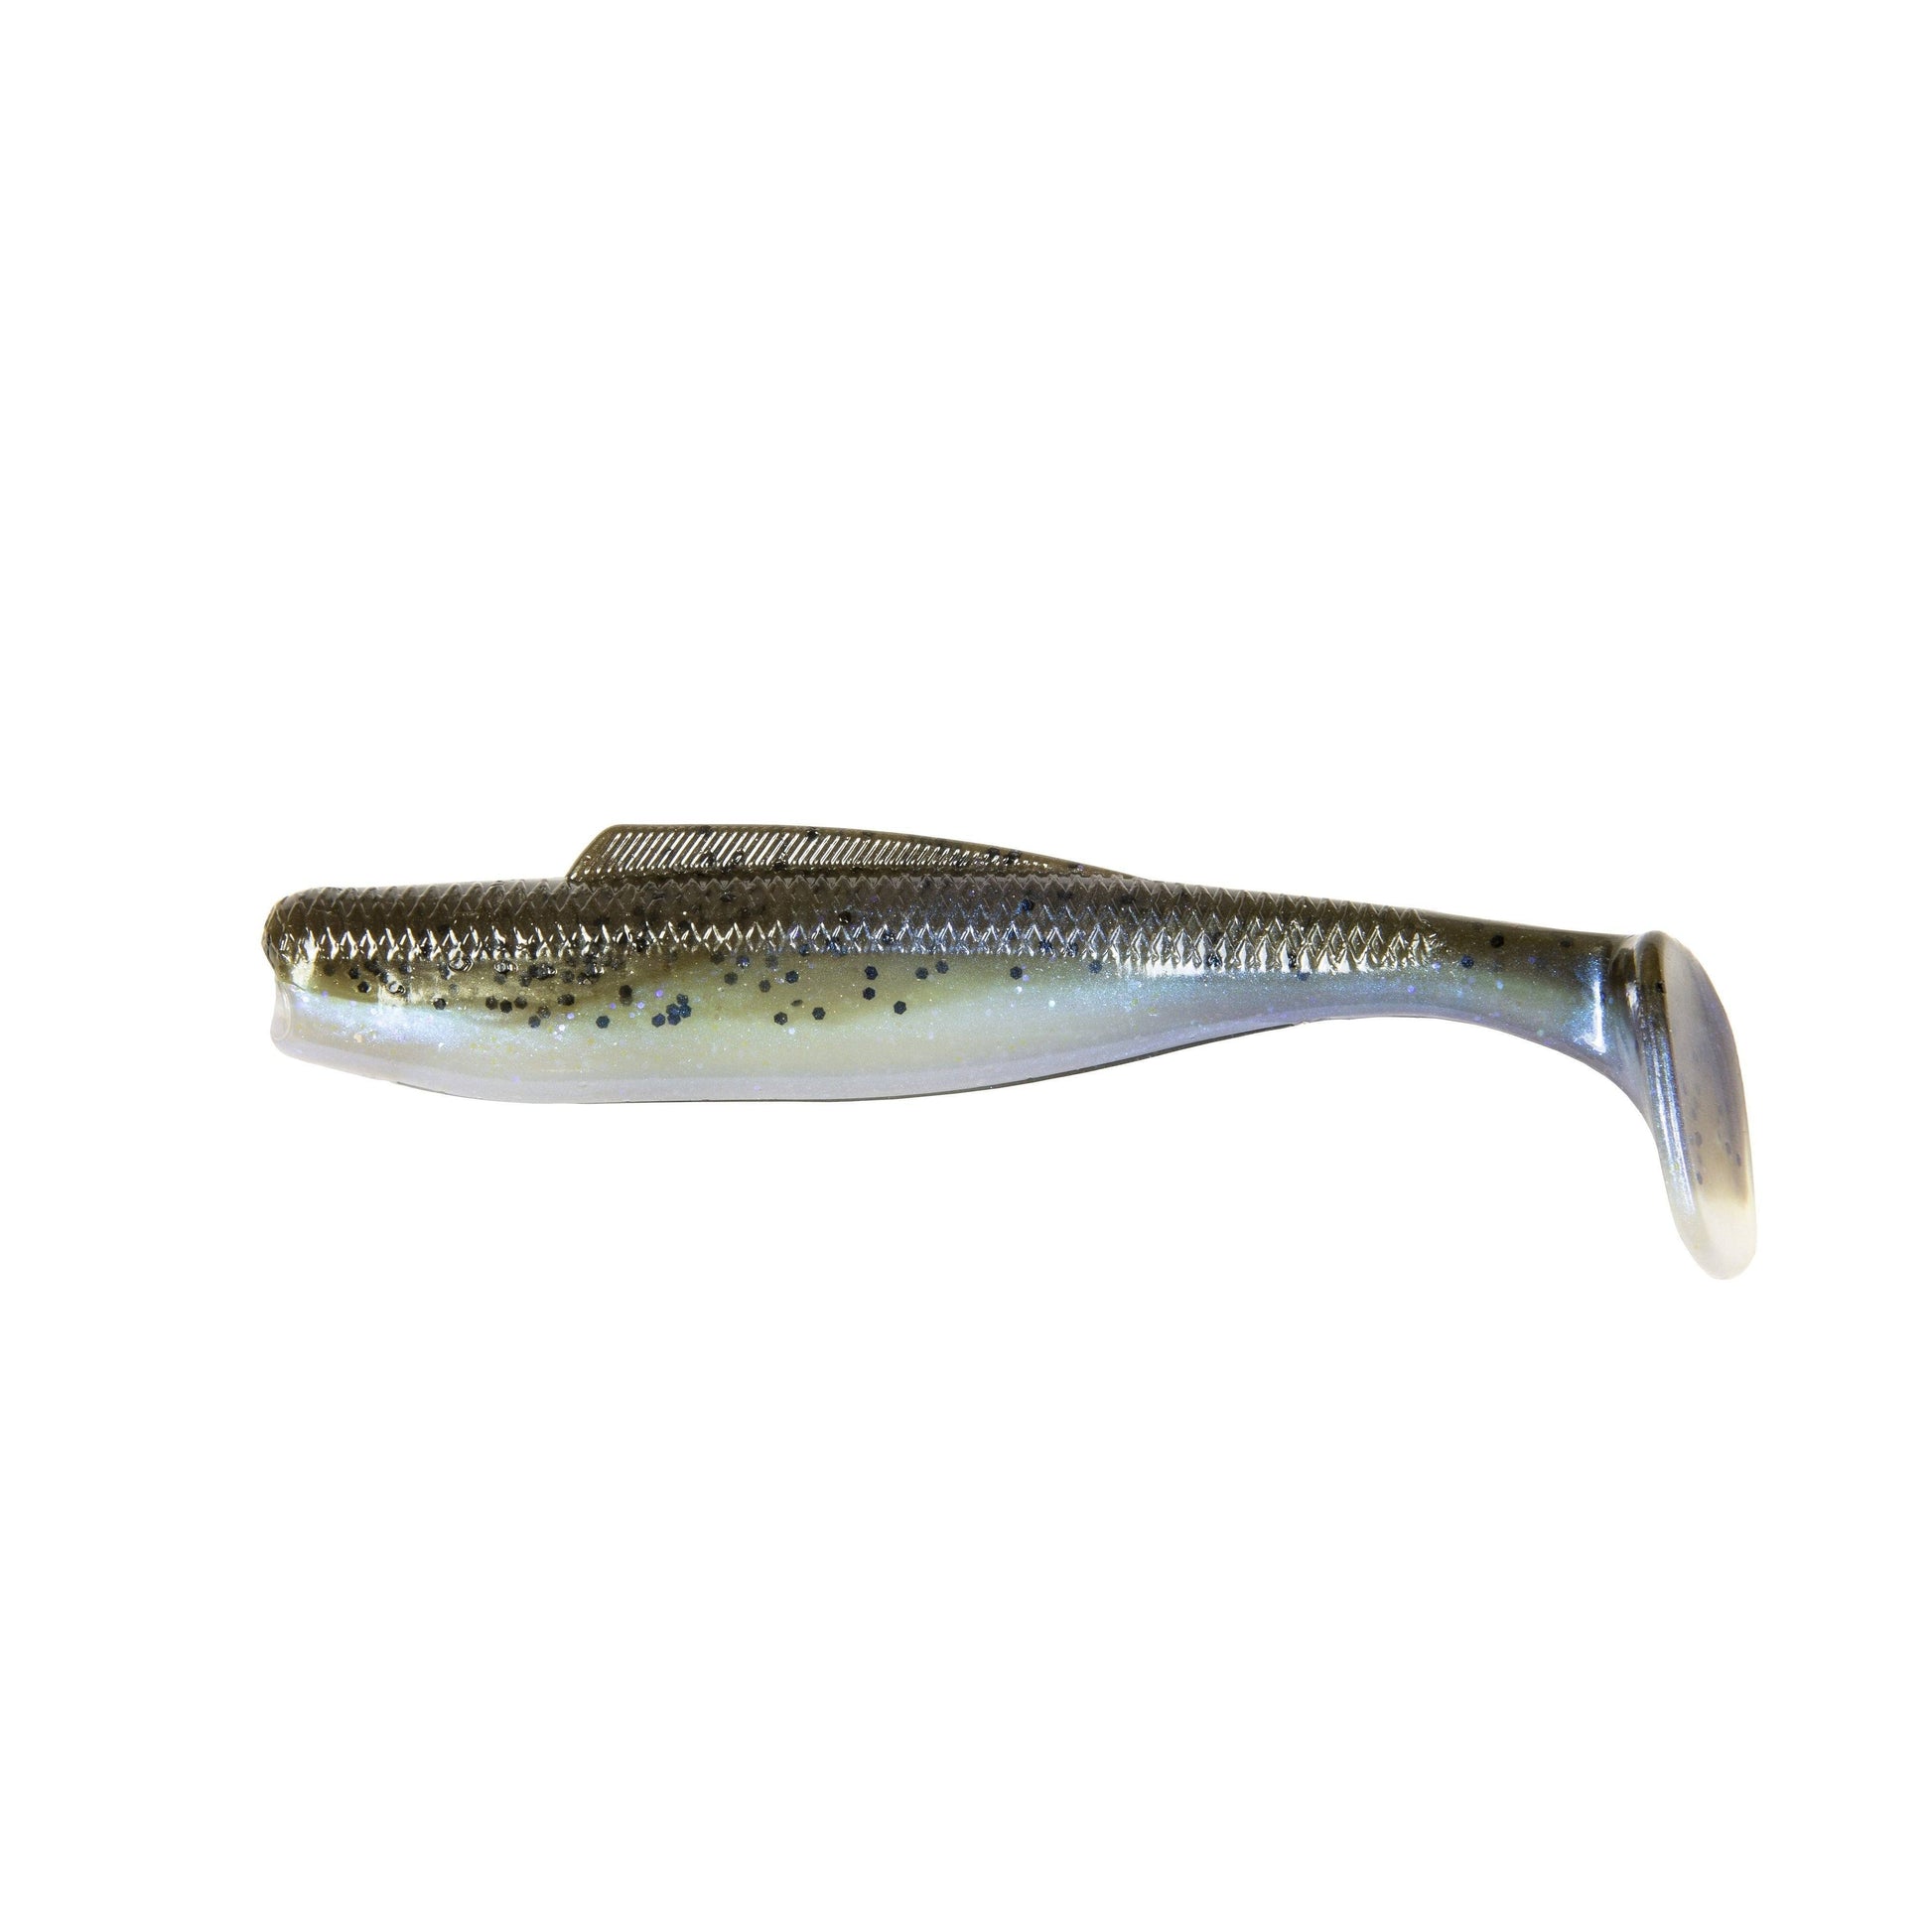 4 Catch-On Minnow, Wonder Bread/Pearl, Pack of 5#4COM-WB-5P